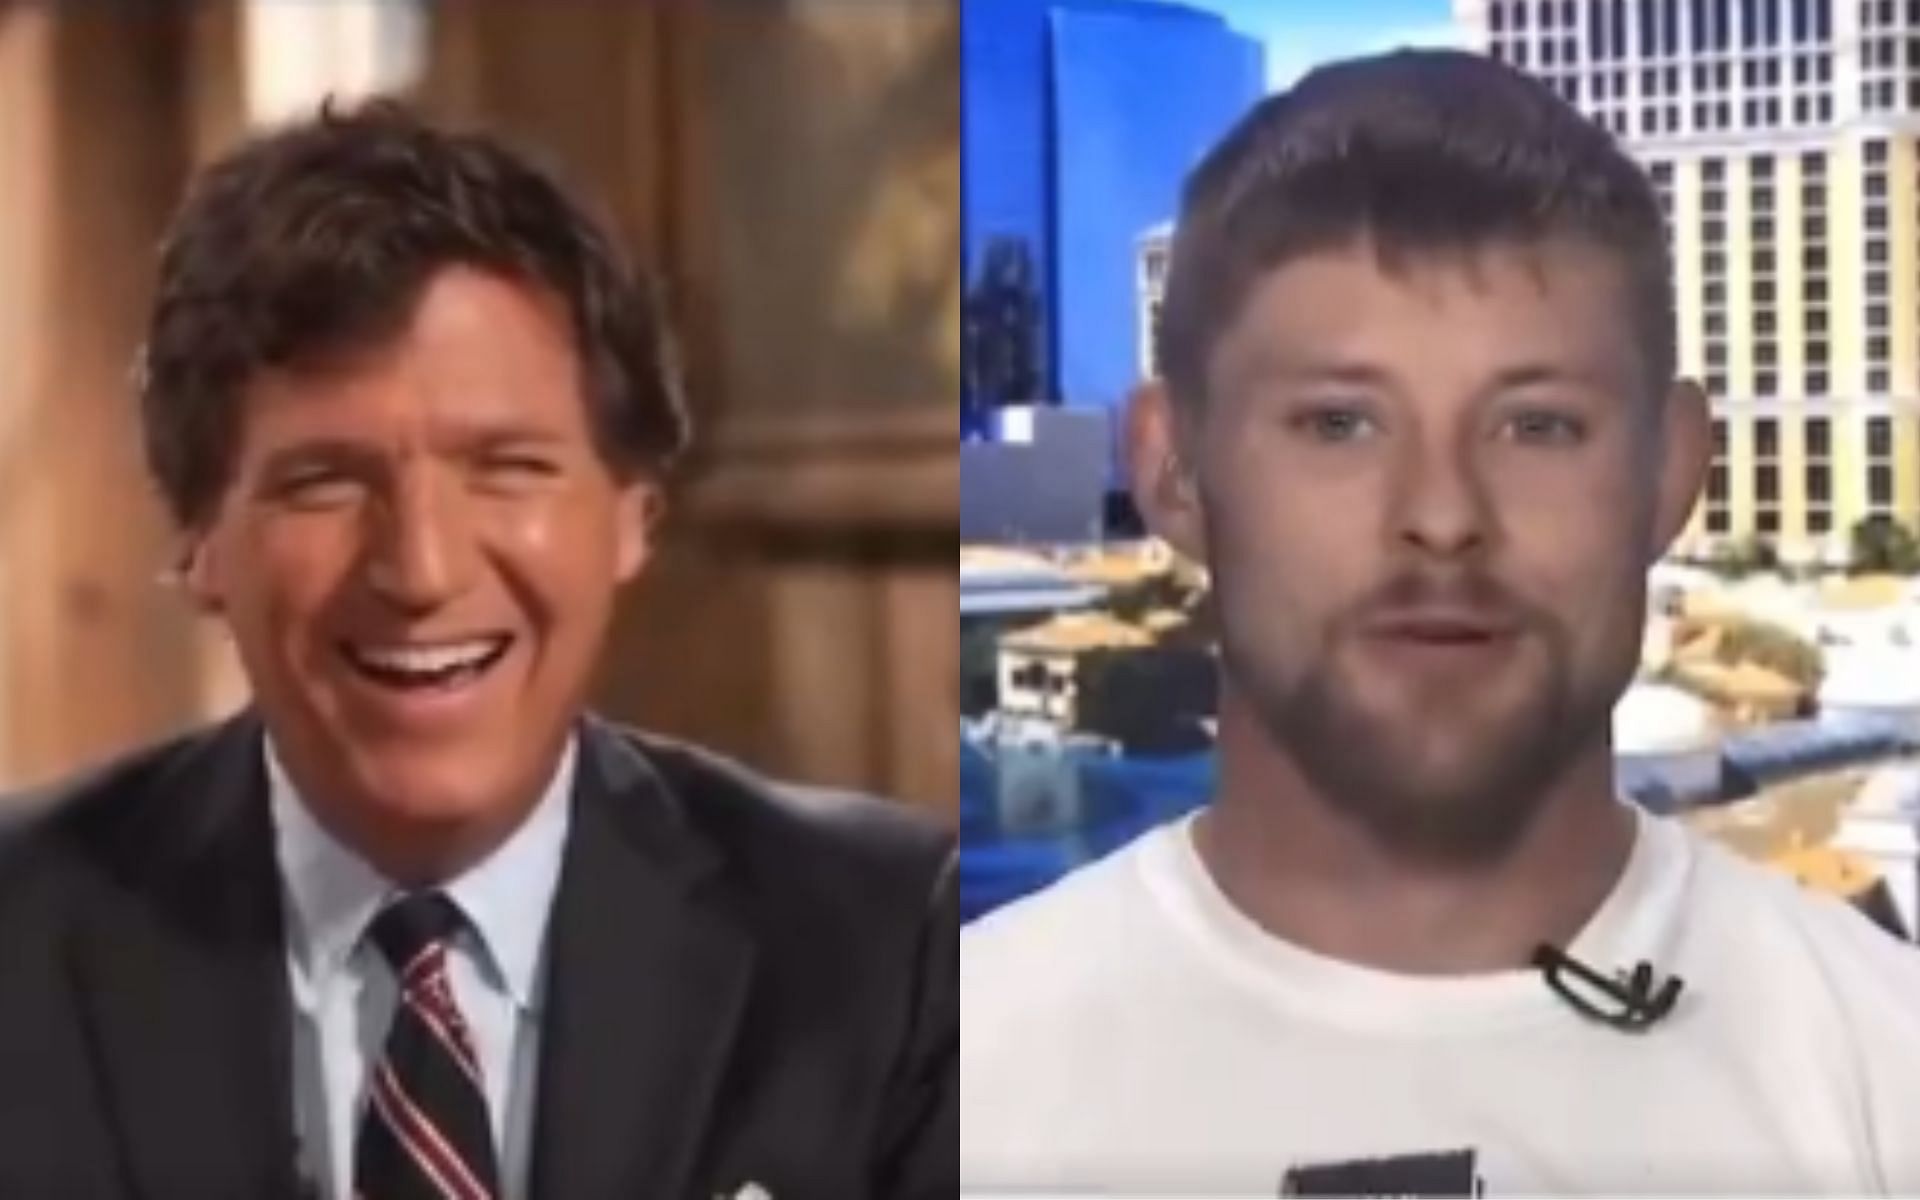 Bryce Mitchell [Right] shared a story of meeting his wife to Tucker Carlson [Left] [Image courtesy: Tucker Carlson Uncensored]